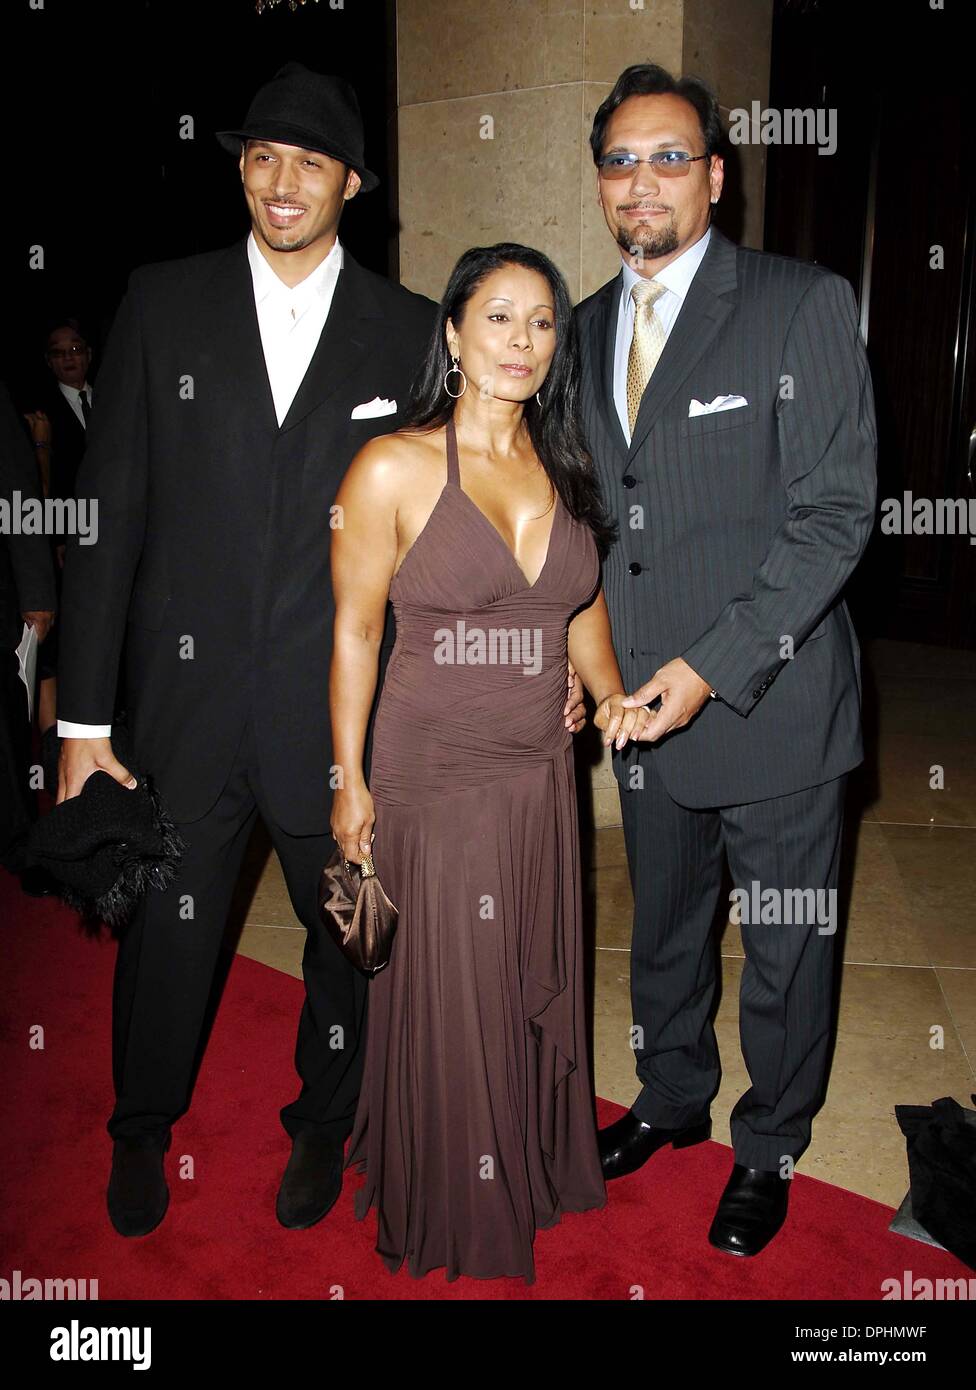 Aug. 18, 2006 - Hollywood, California, U.S. - K49339MGE.BEVERLY HILLS, CA AUGUST 18, 2006 (SSI) - -.Joaquin Smits, actress Wanda De Jesus and actor Jimmy Smits  during the 21st Annual Imagen Awards Gala, held at the Beverly Hilton Hotel, on August 18, 2006, in Beverly Hills, California.(Credit Image: © Michael Germana/Globe Photos/ZUMAPRESS.com) Stock Photo